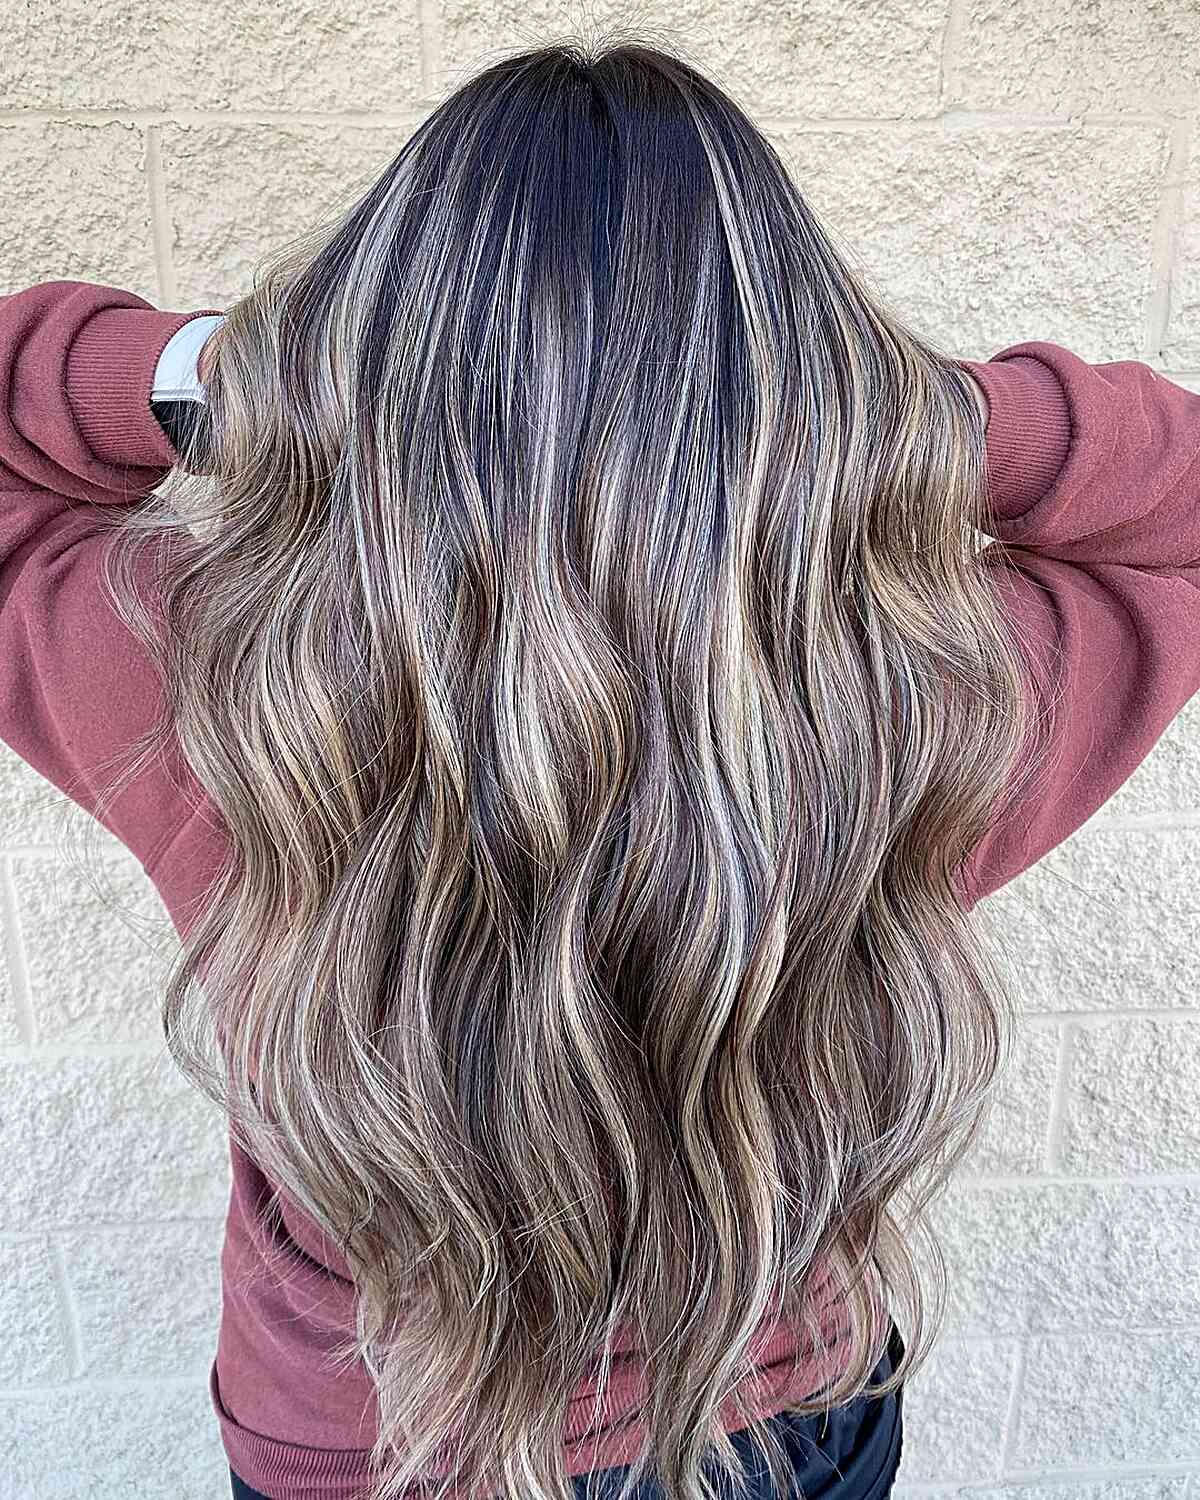 Long-Length Platinum Balayage Highlights with Darker Roots